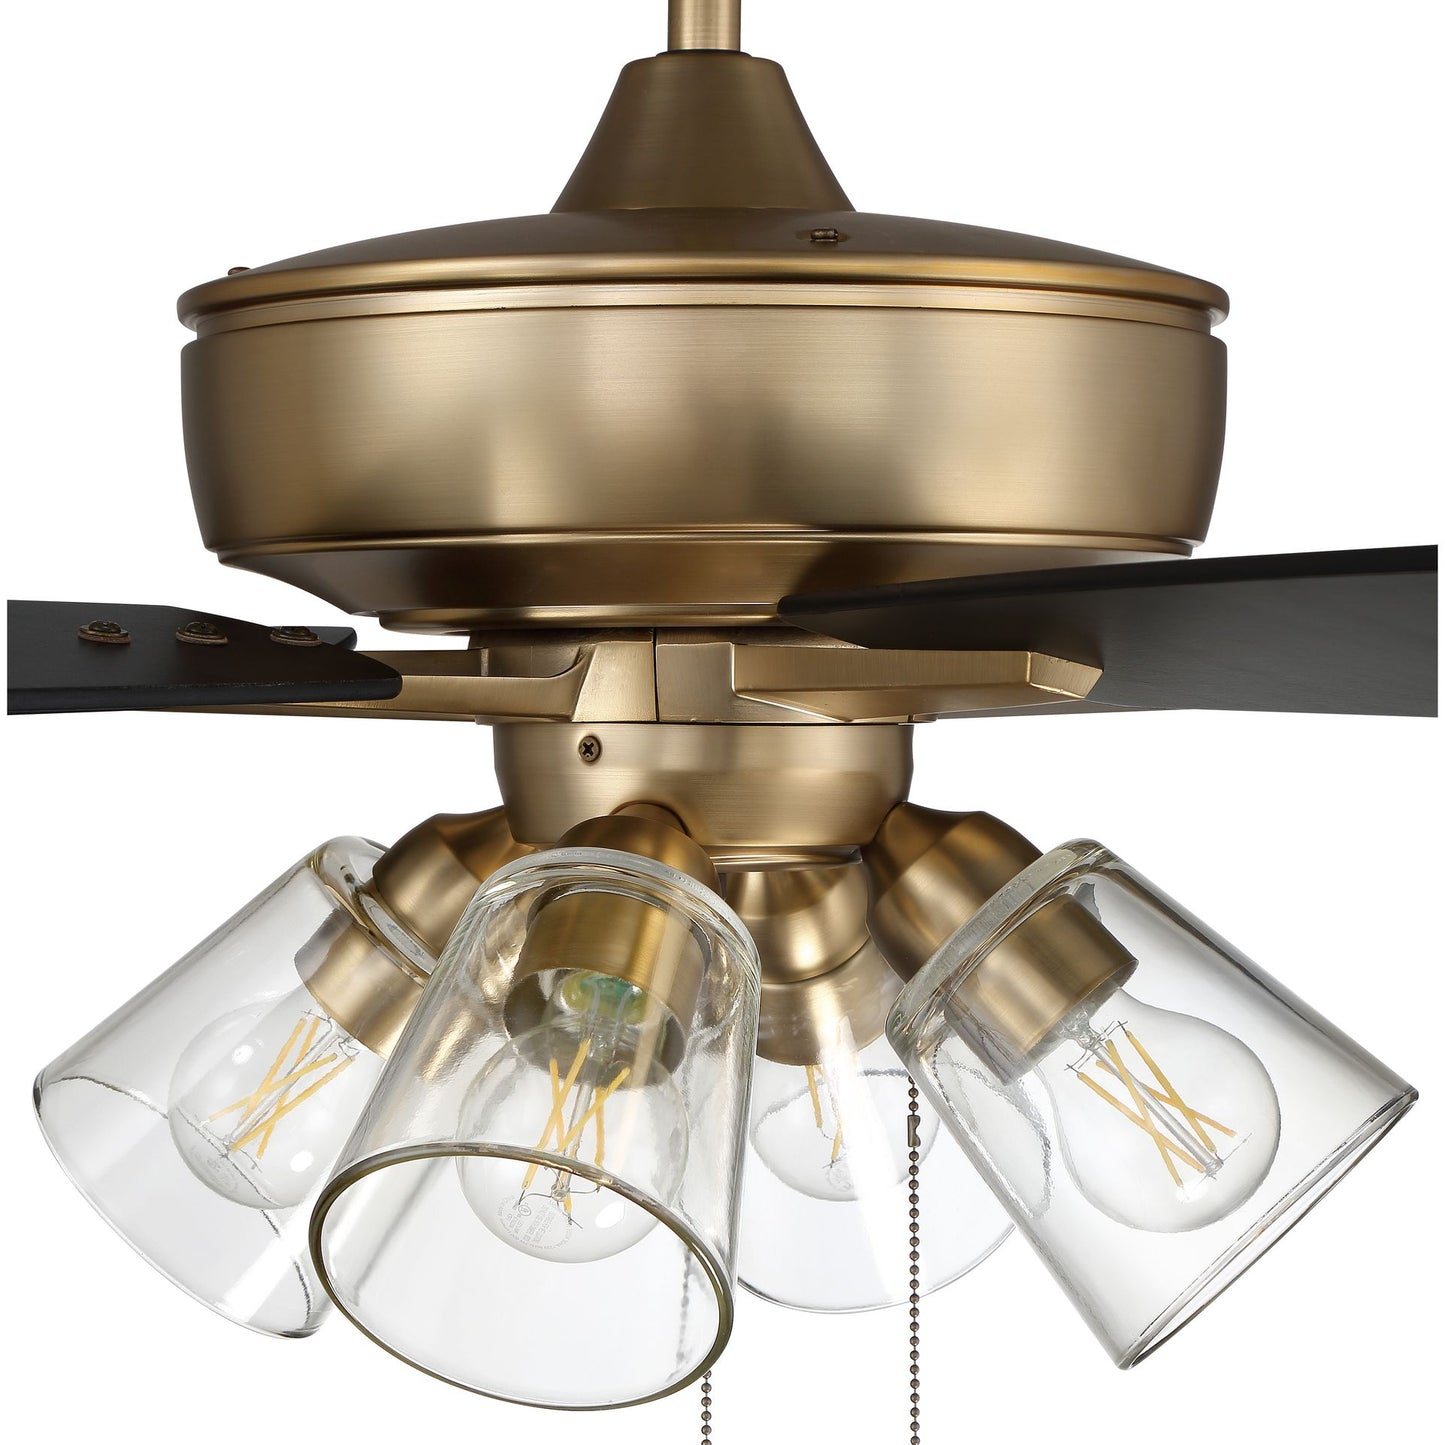 S104SB5-60BWNFB - Super Pro 104 60" 5 Blade Ceiling Fan with Light Kit - Pull Chain - Satin Brass